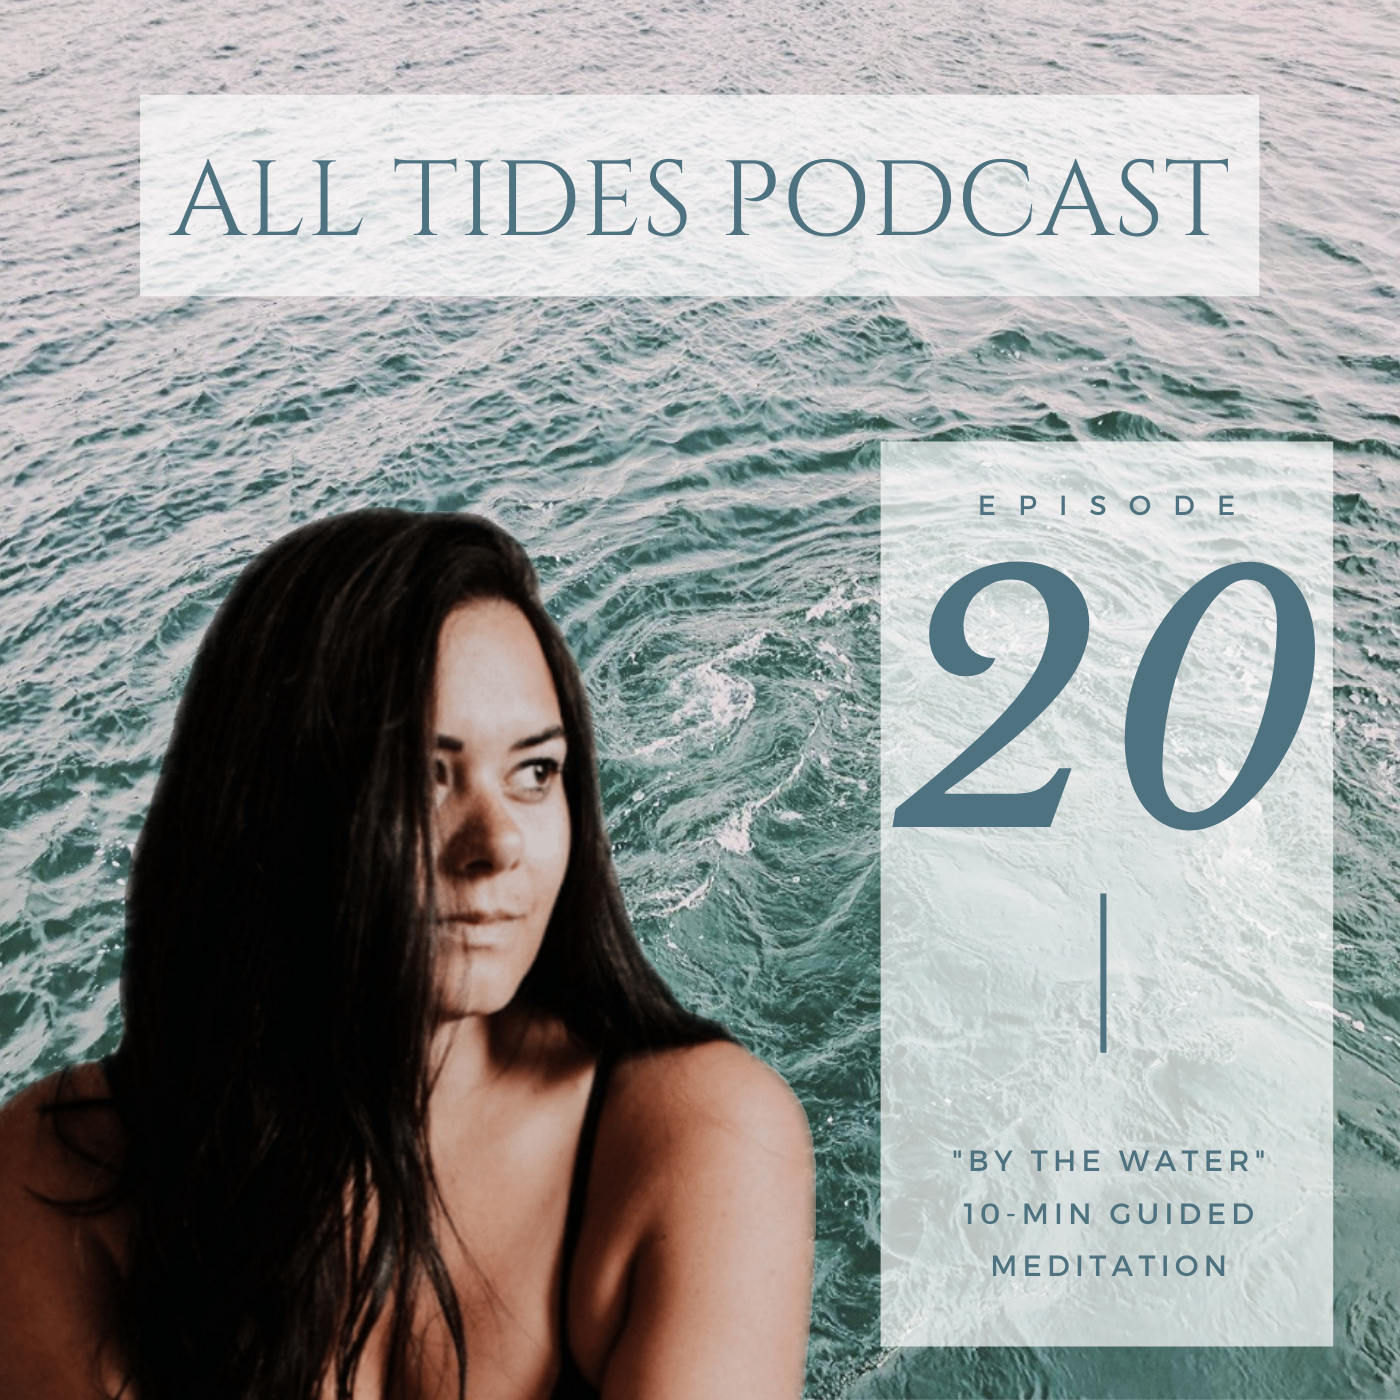 Episode 20 - "By the Water" 10 Minute Guided Meditation